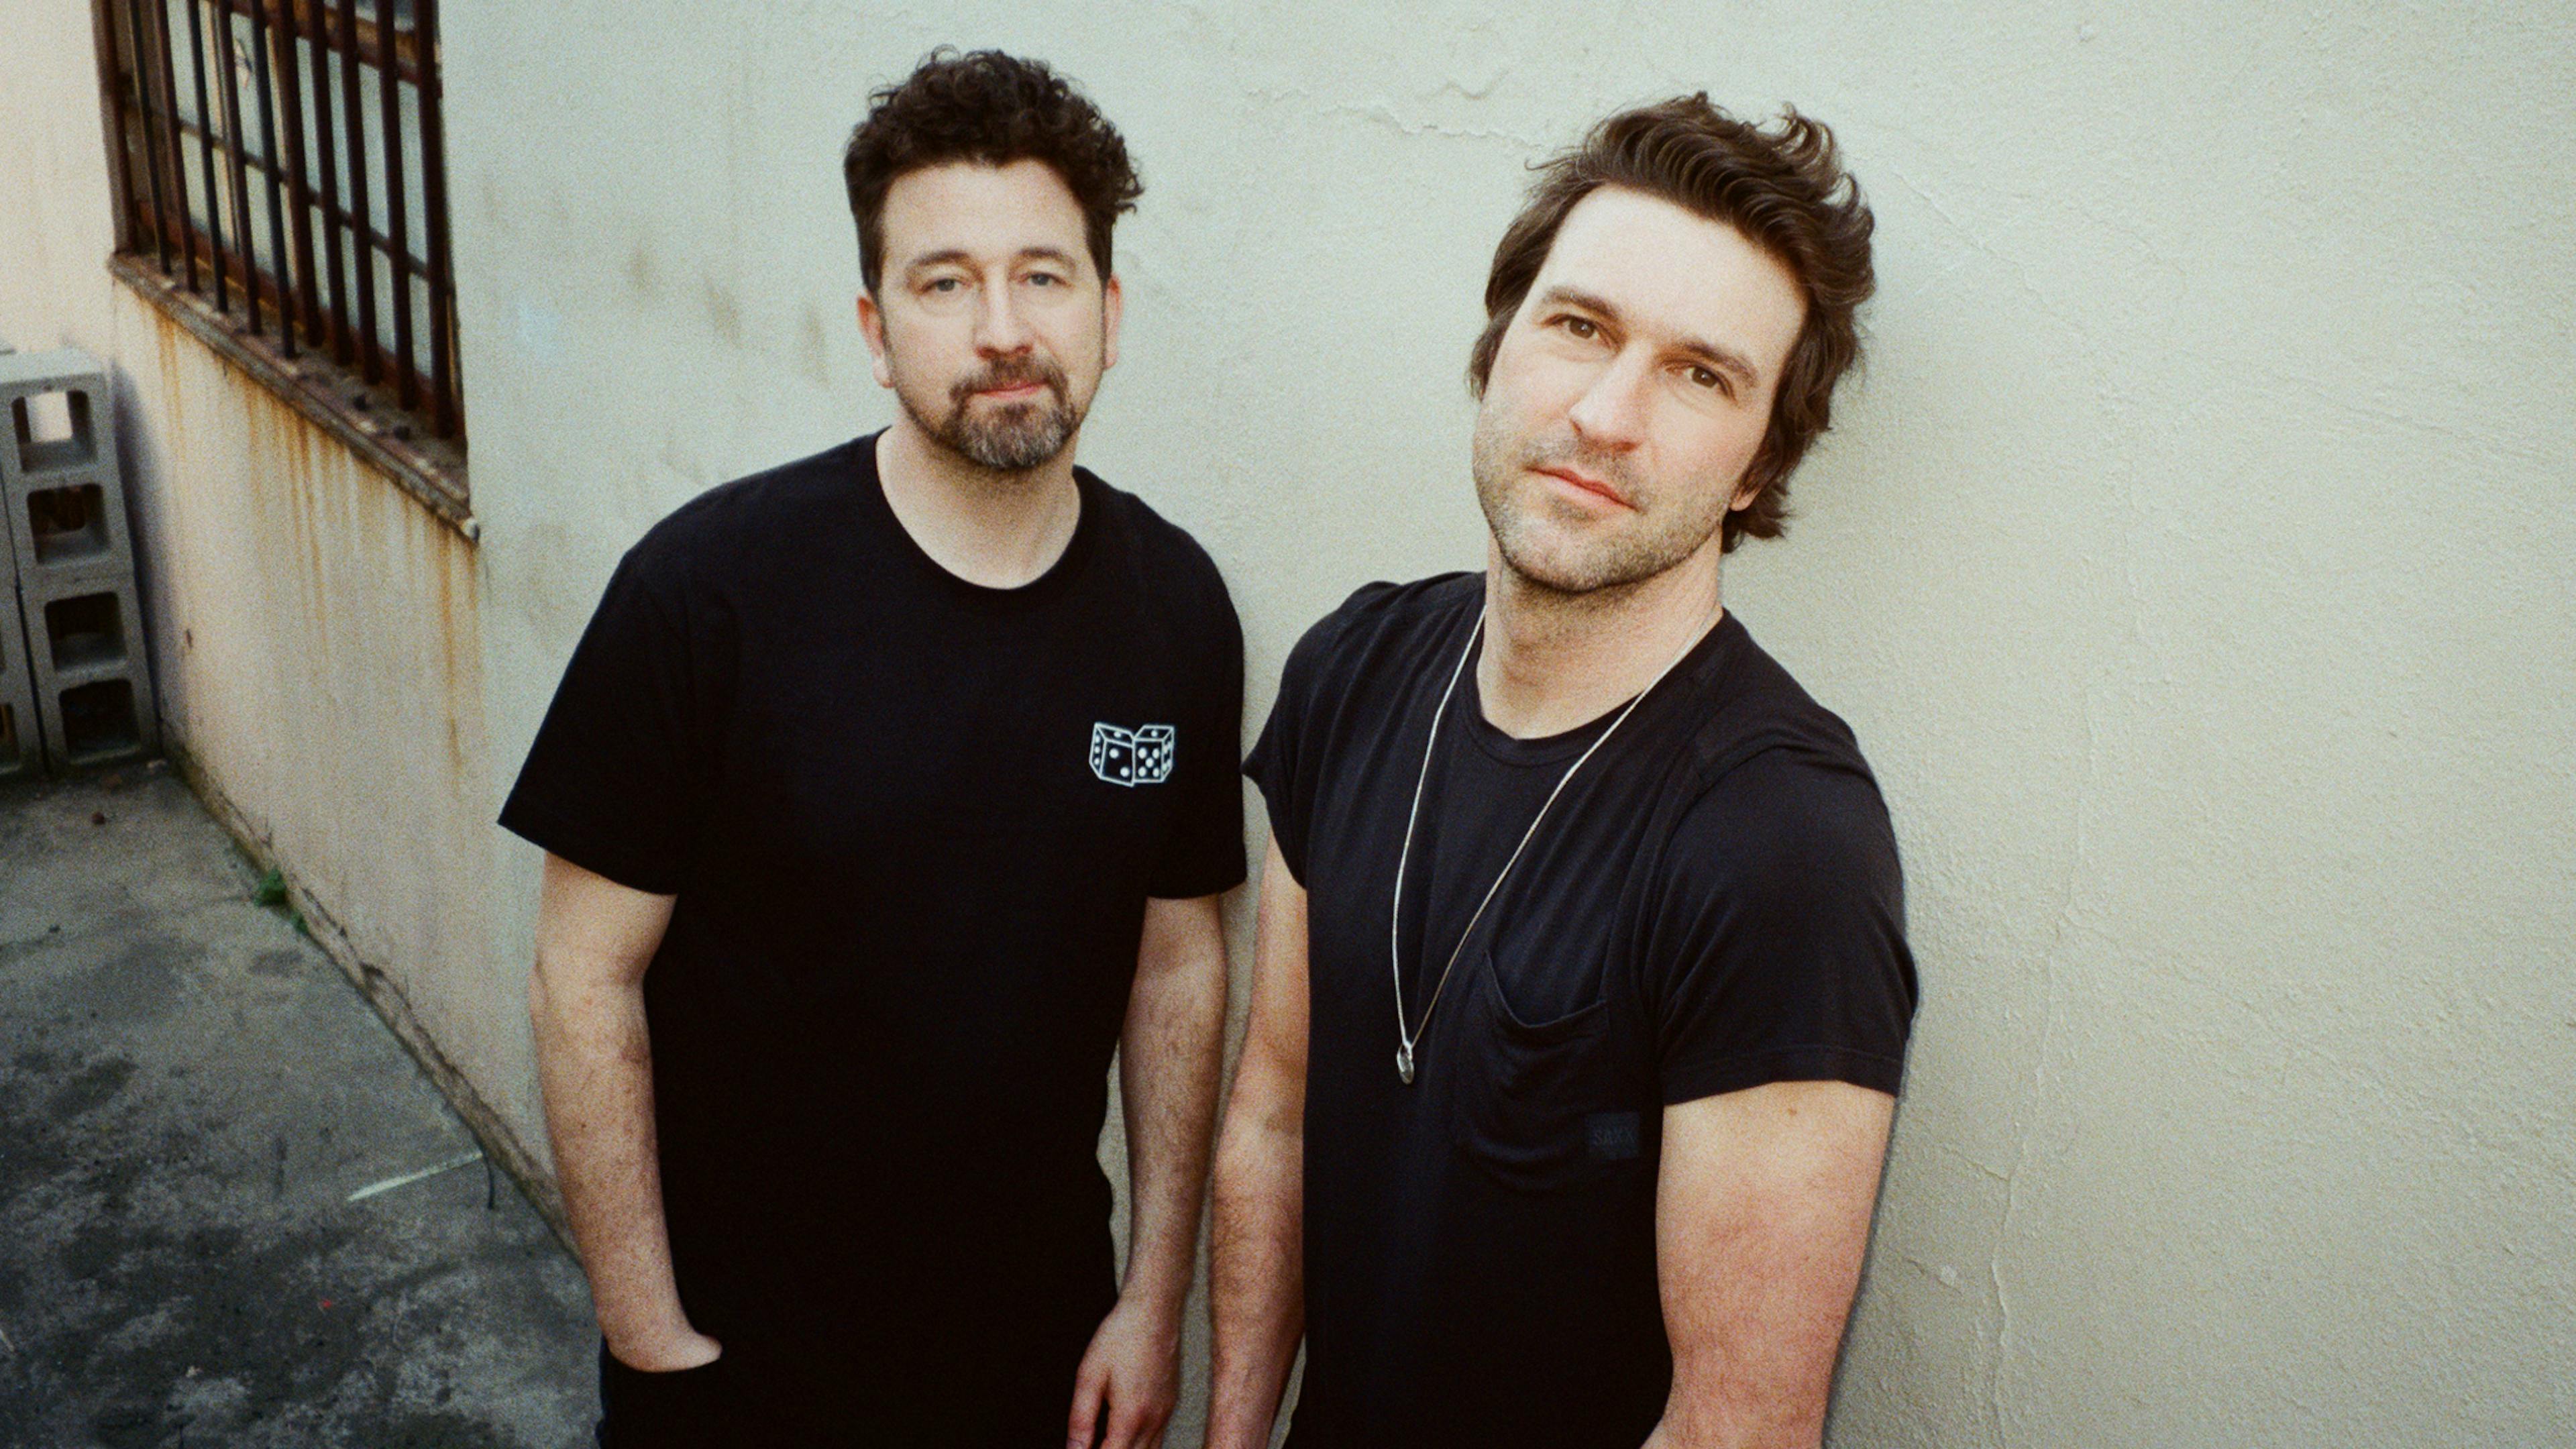 Japandroids have announced their final album, Fate & Alcohol